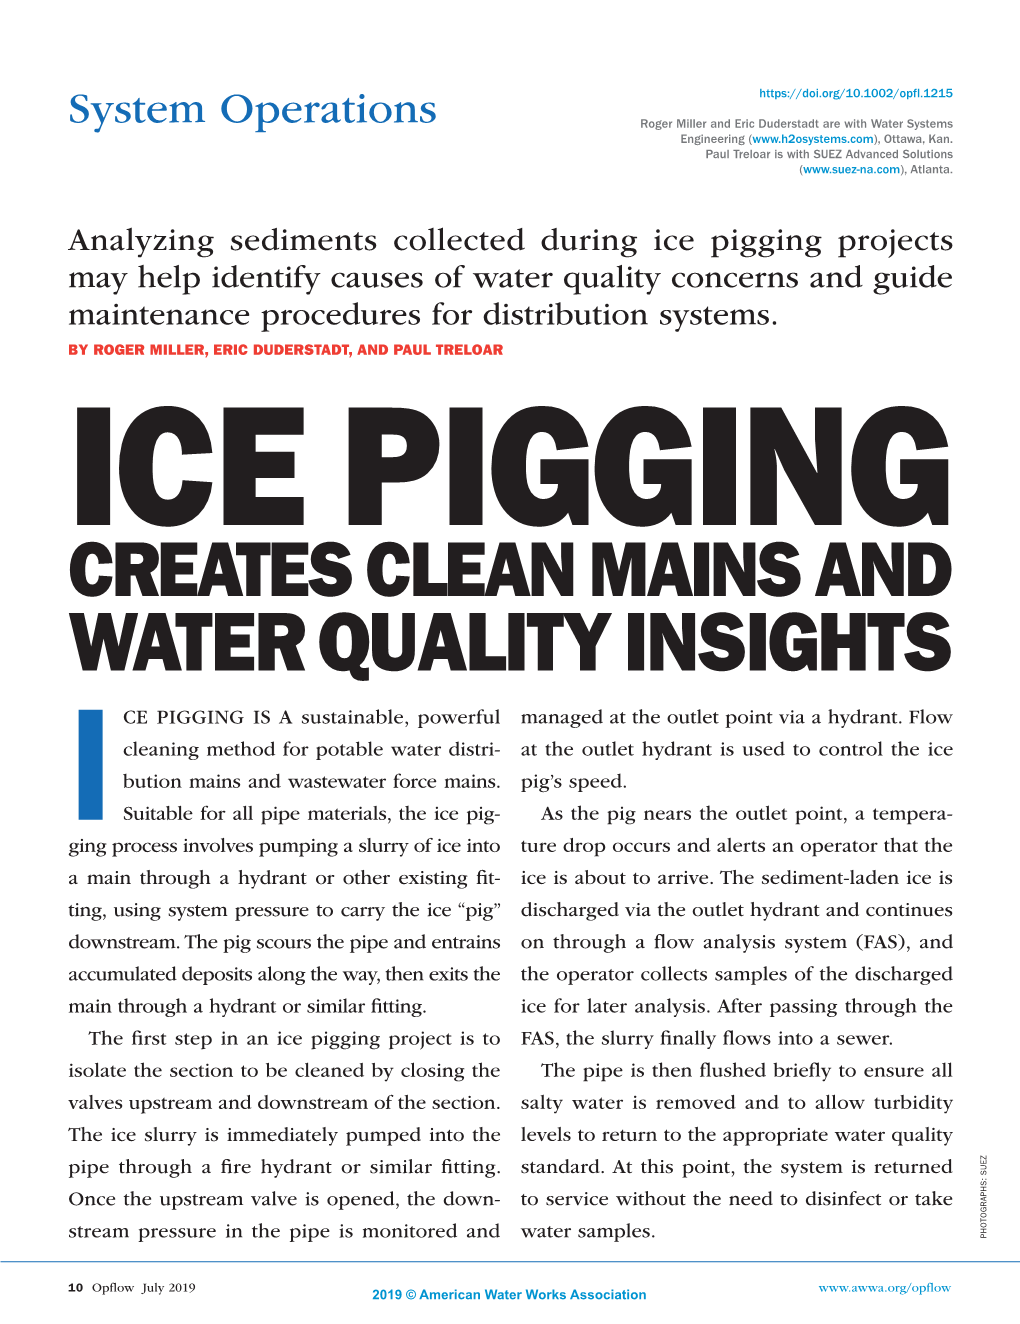 WATER QUALITY INSIGHTS CE PIGGING IS a Sustainable, Powerful Managed at the Outlet Point Via a Hydrant